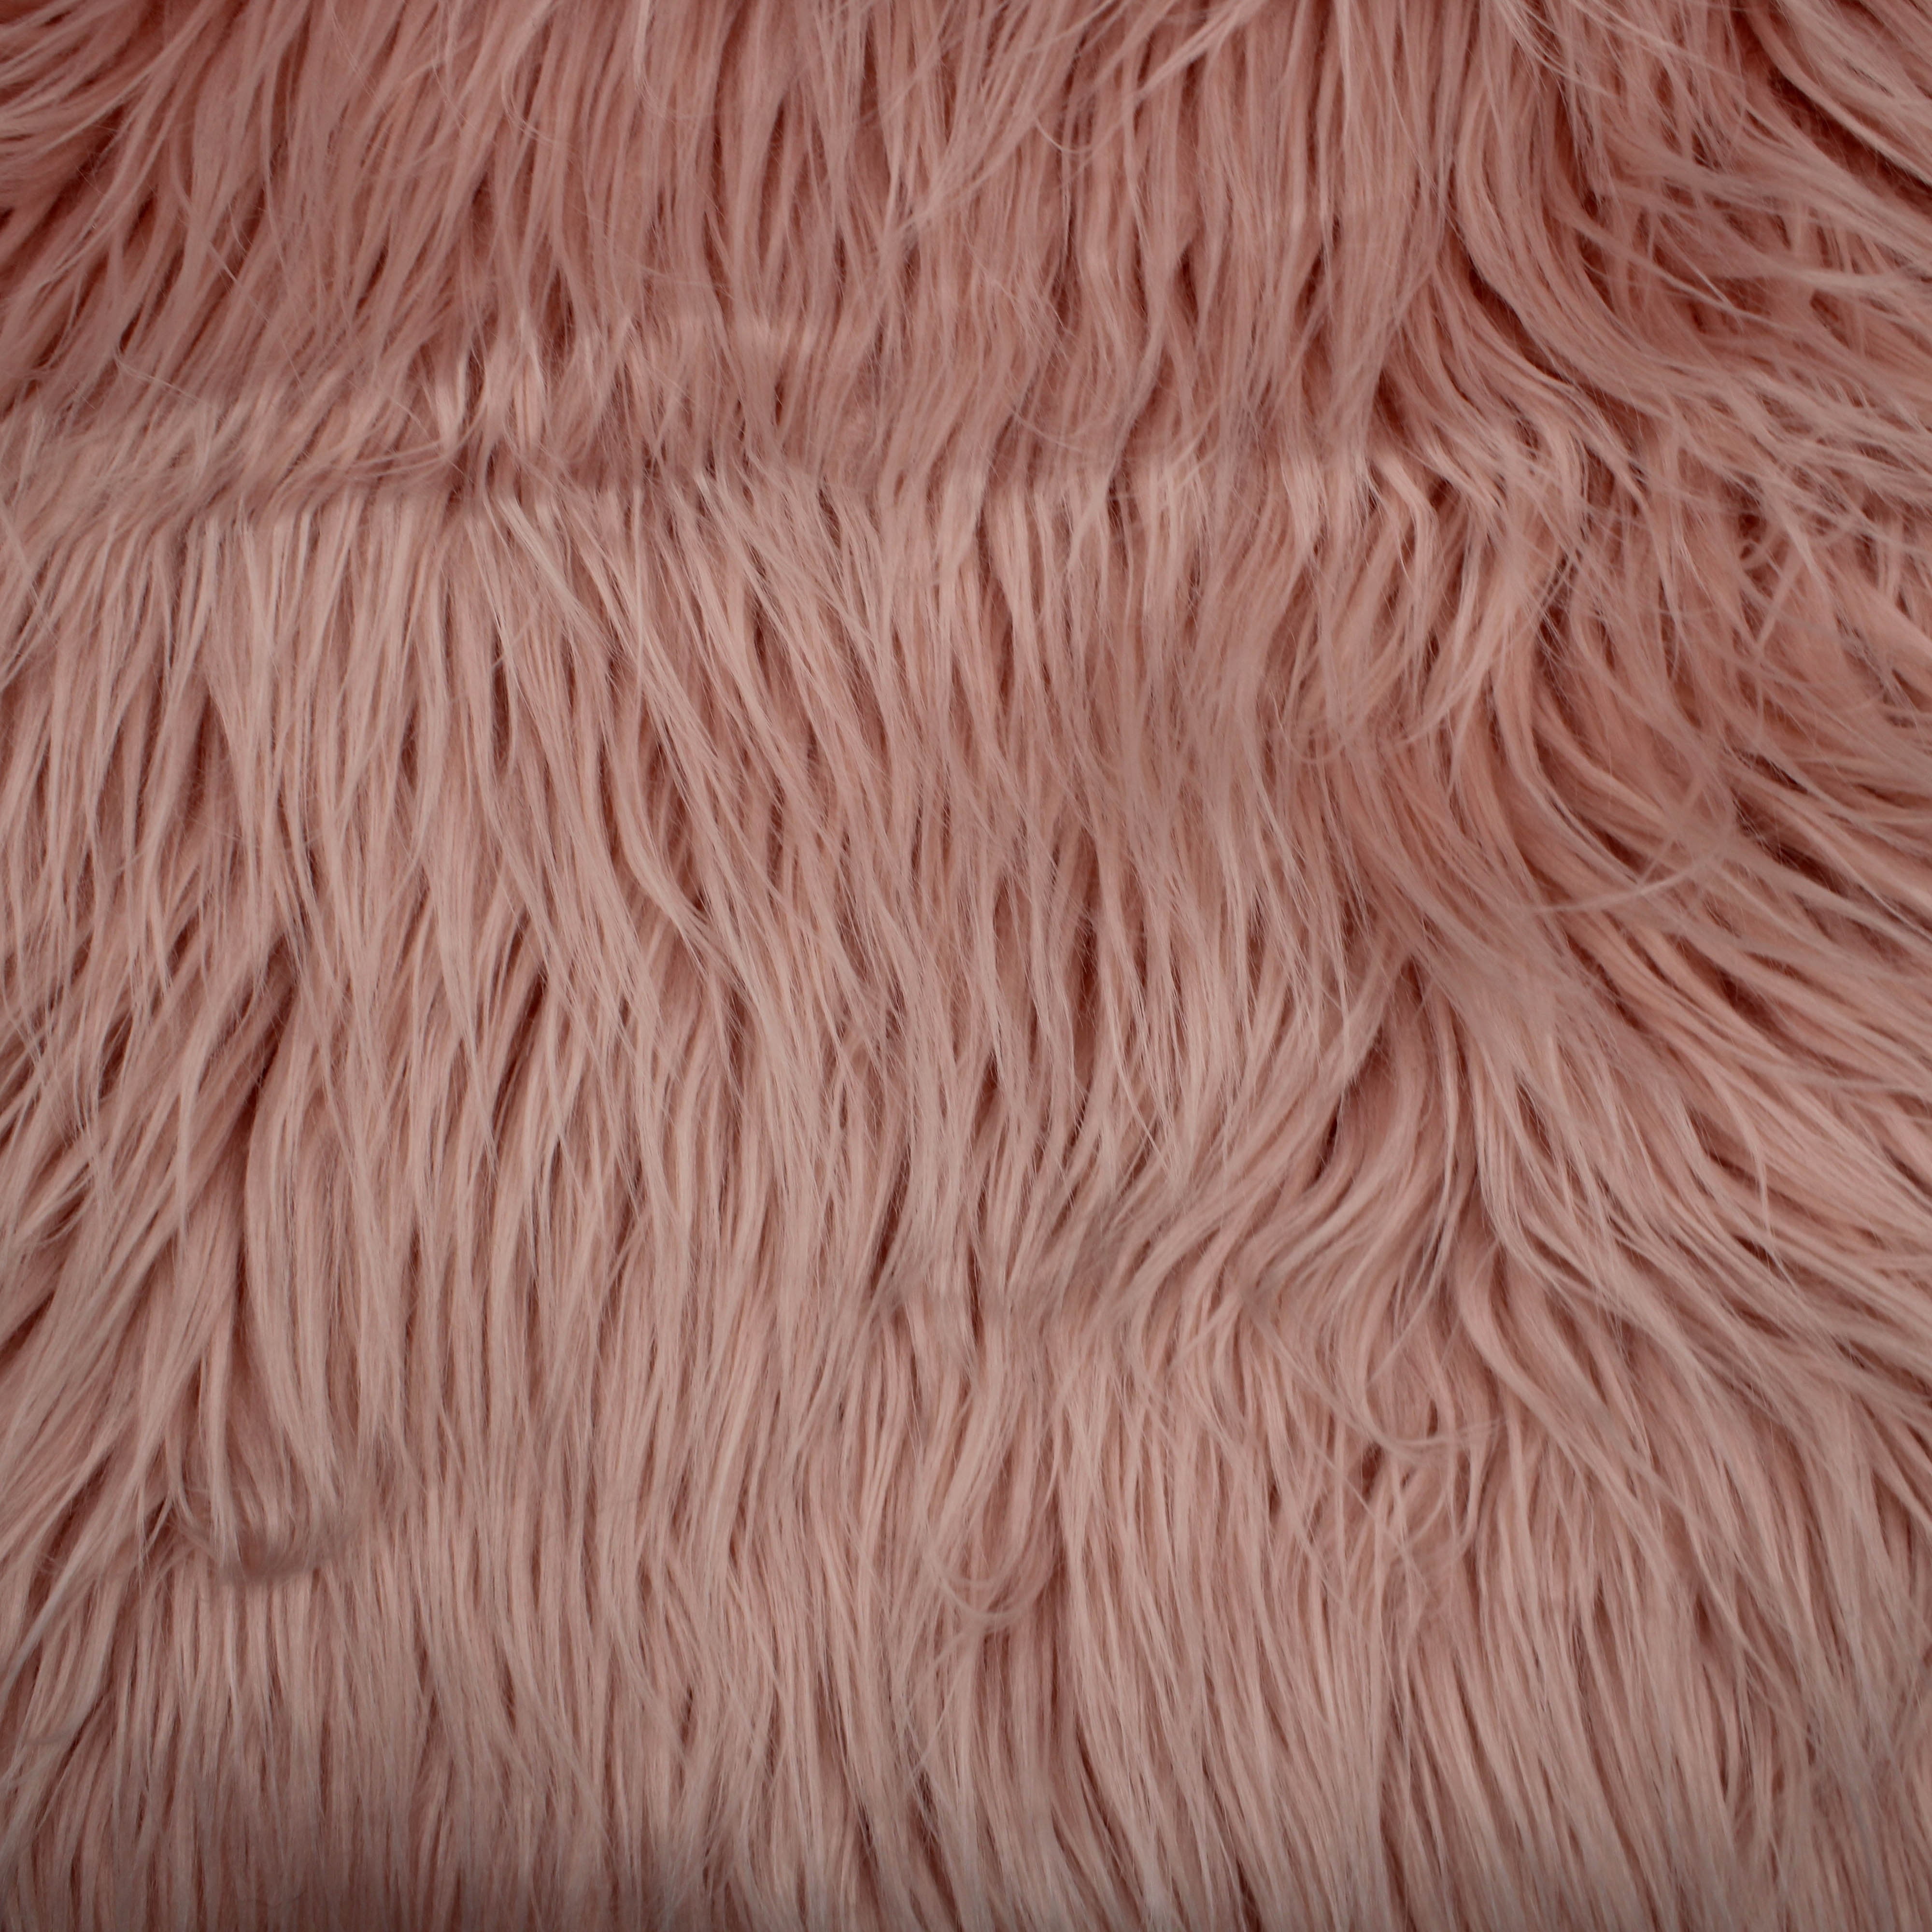 Pink Curly Lamb Faux Fur Fabric by the Yard